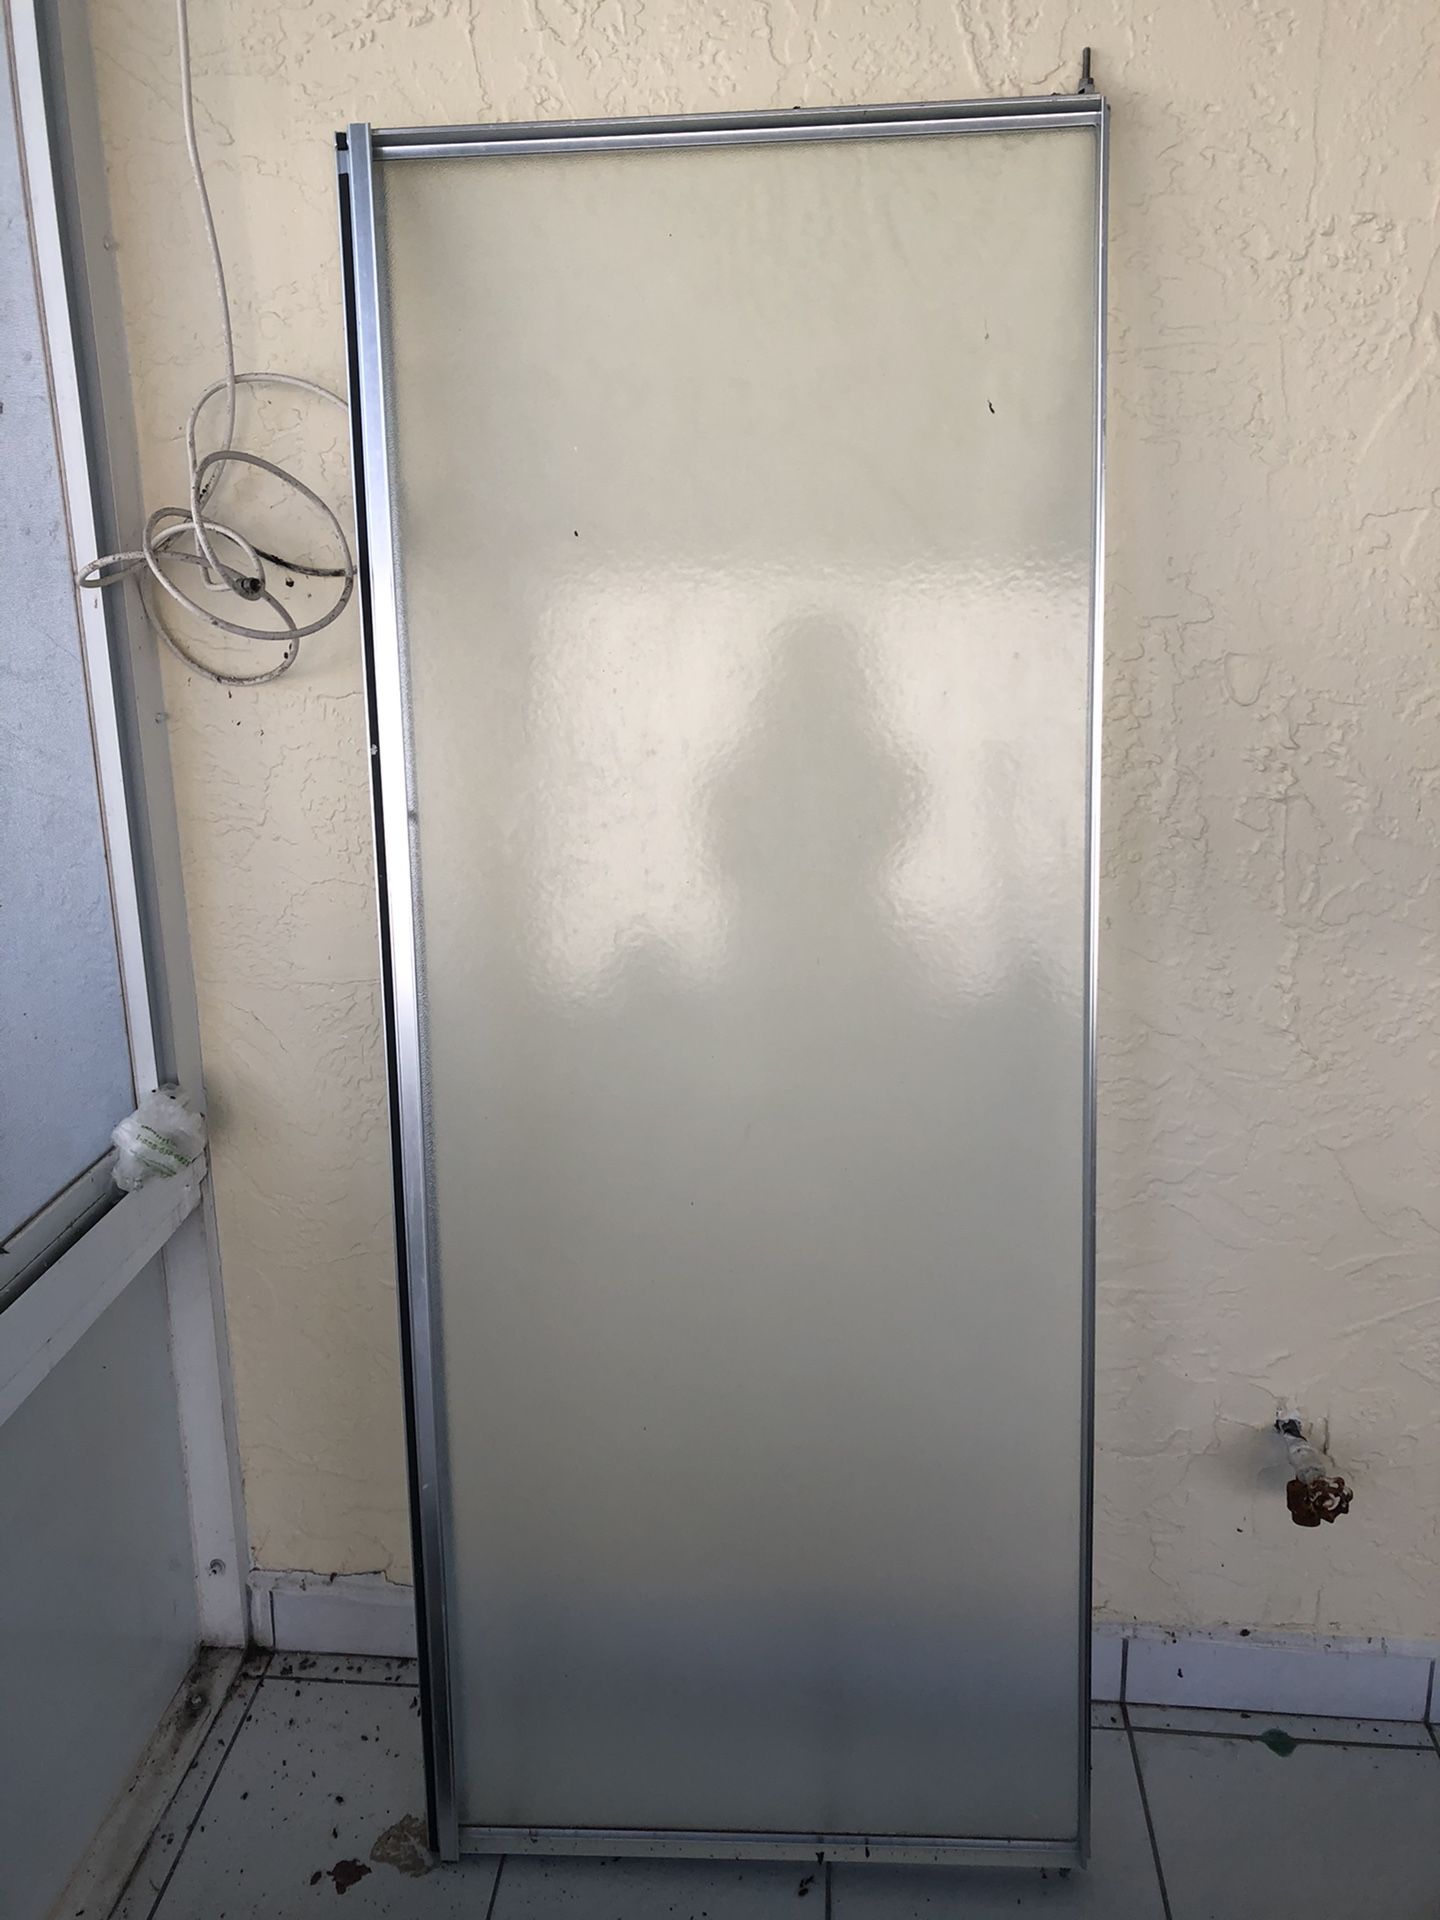 Shower door 57.5 inches high 22.5 inches wide